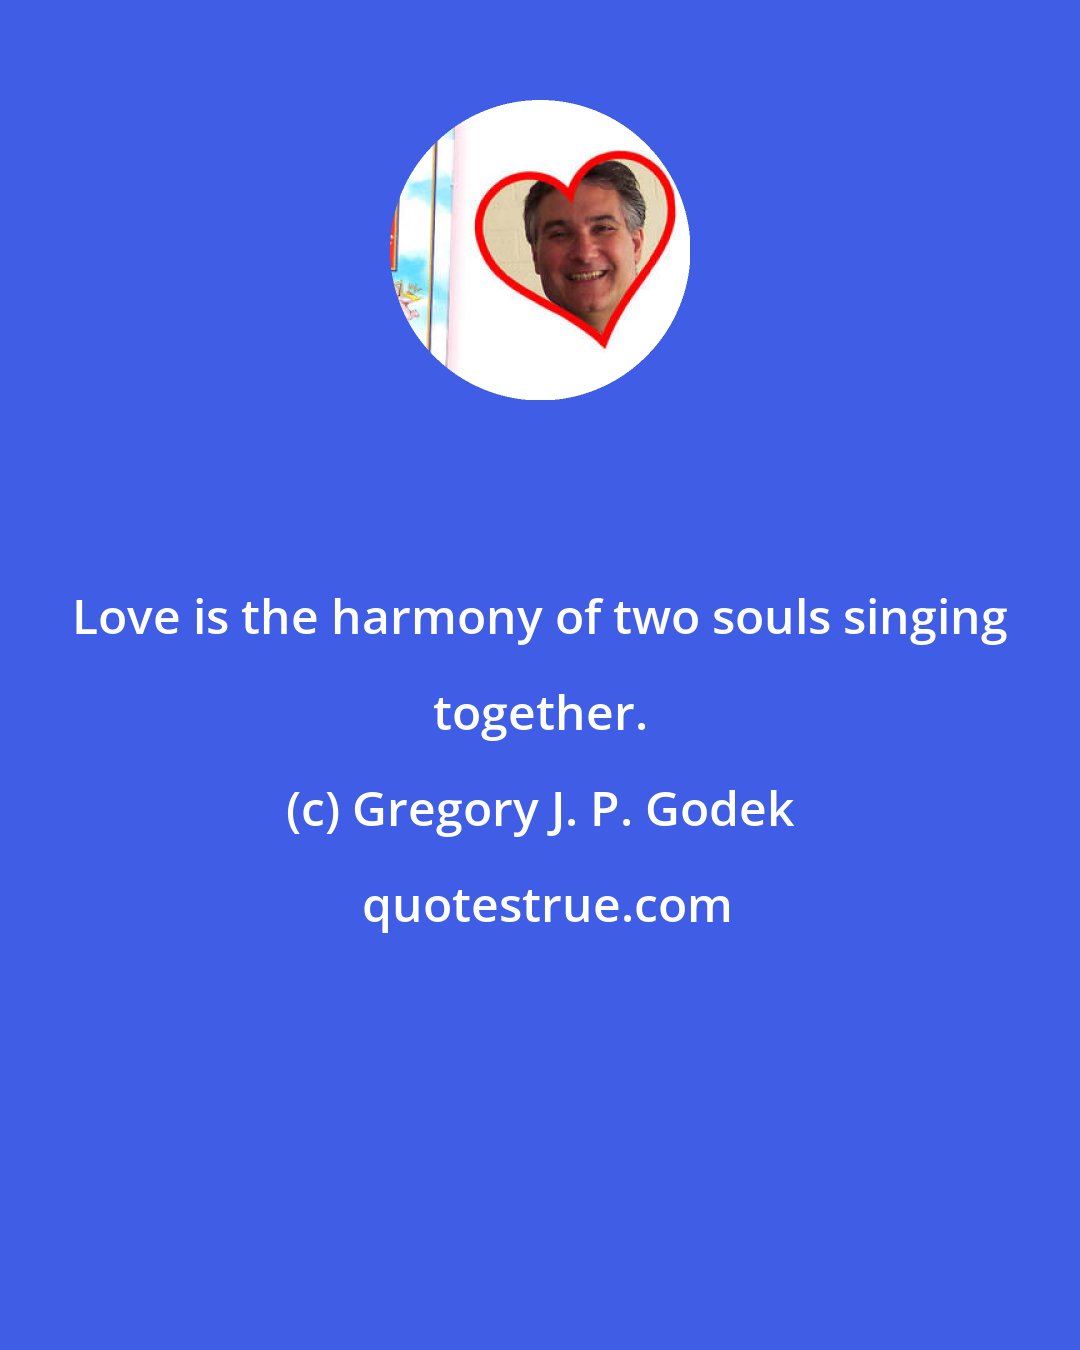 Gregory J. P. Godek: Love is the harmony of two souls singing together.